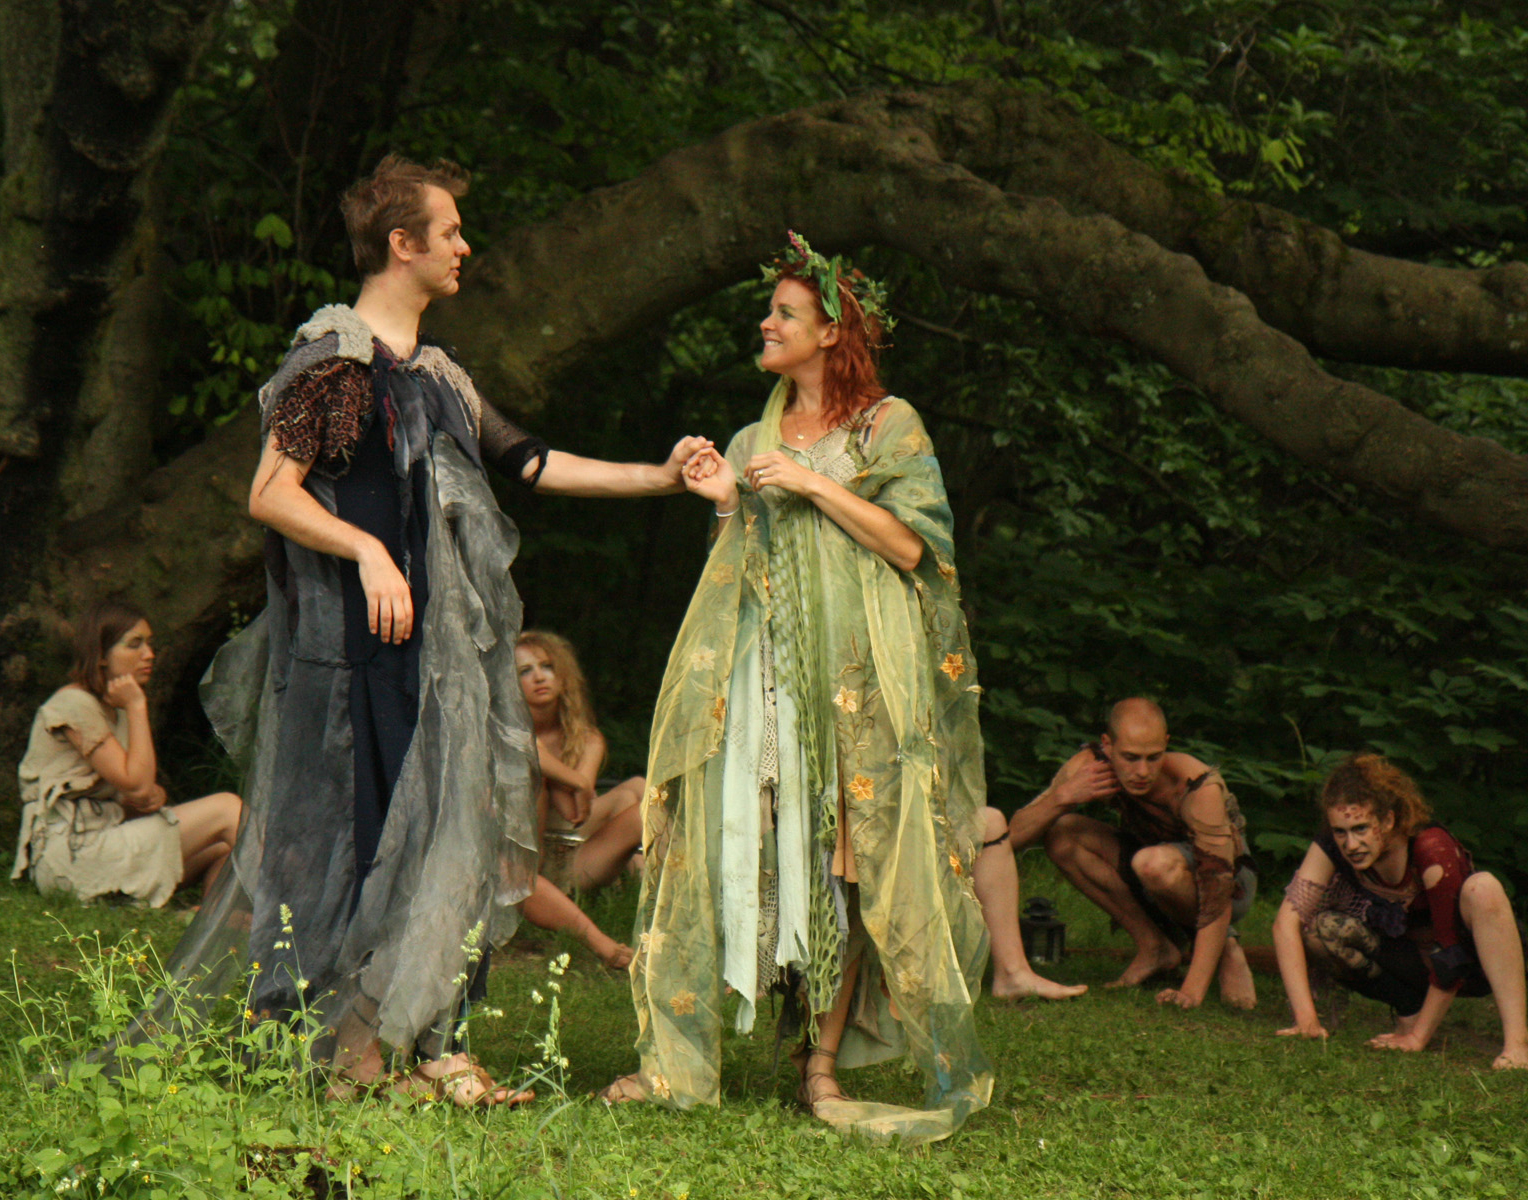 Expired) Shakespeare In The Arb: A Mid Summer Night's Dream